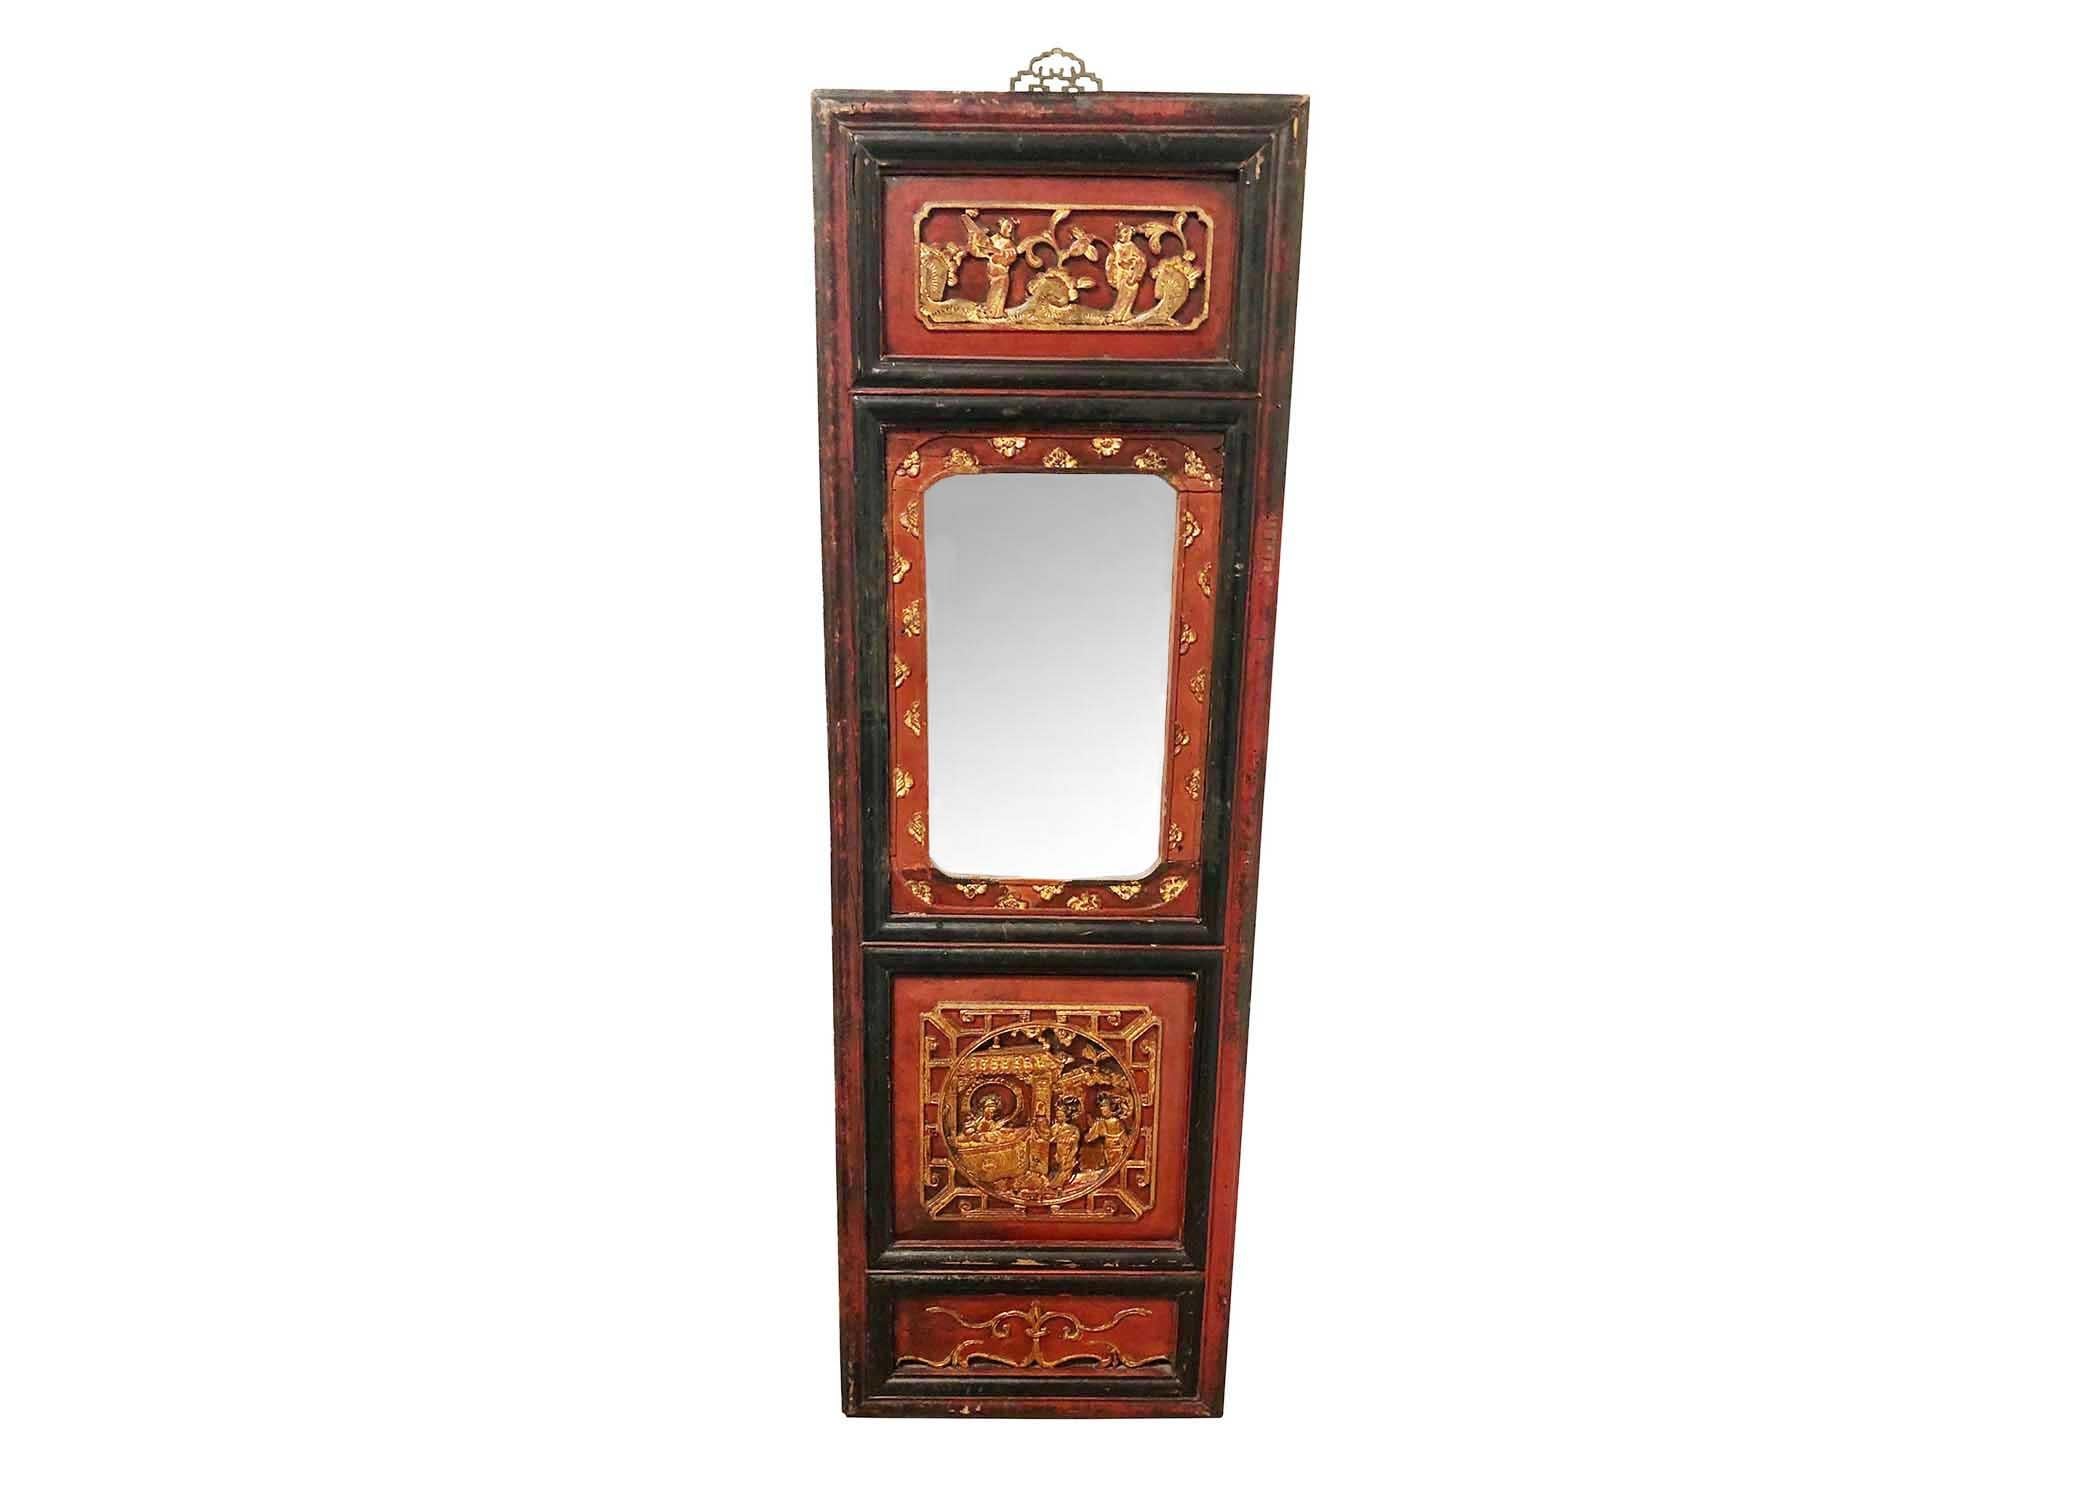 An early 19th century red lacquer with gold accents Chinese fragment with gold courting scenes converted into a mirror. Brass holder for hanging.